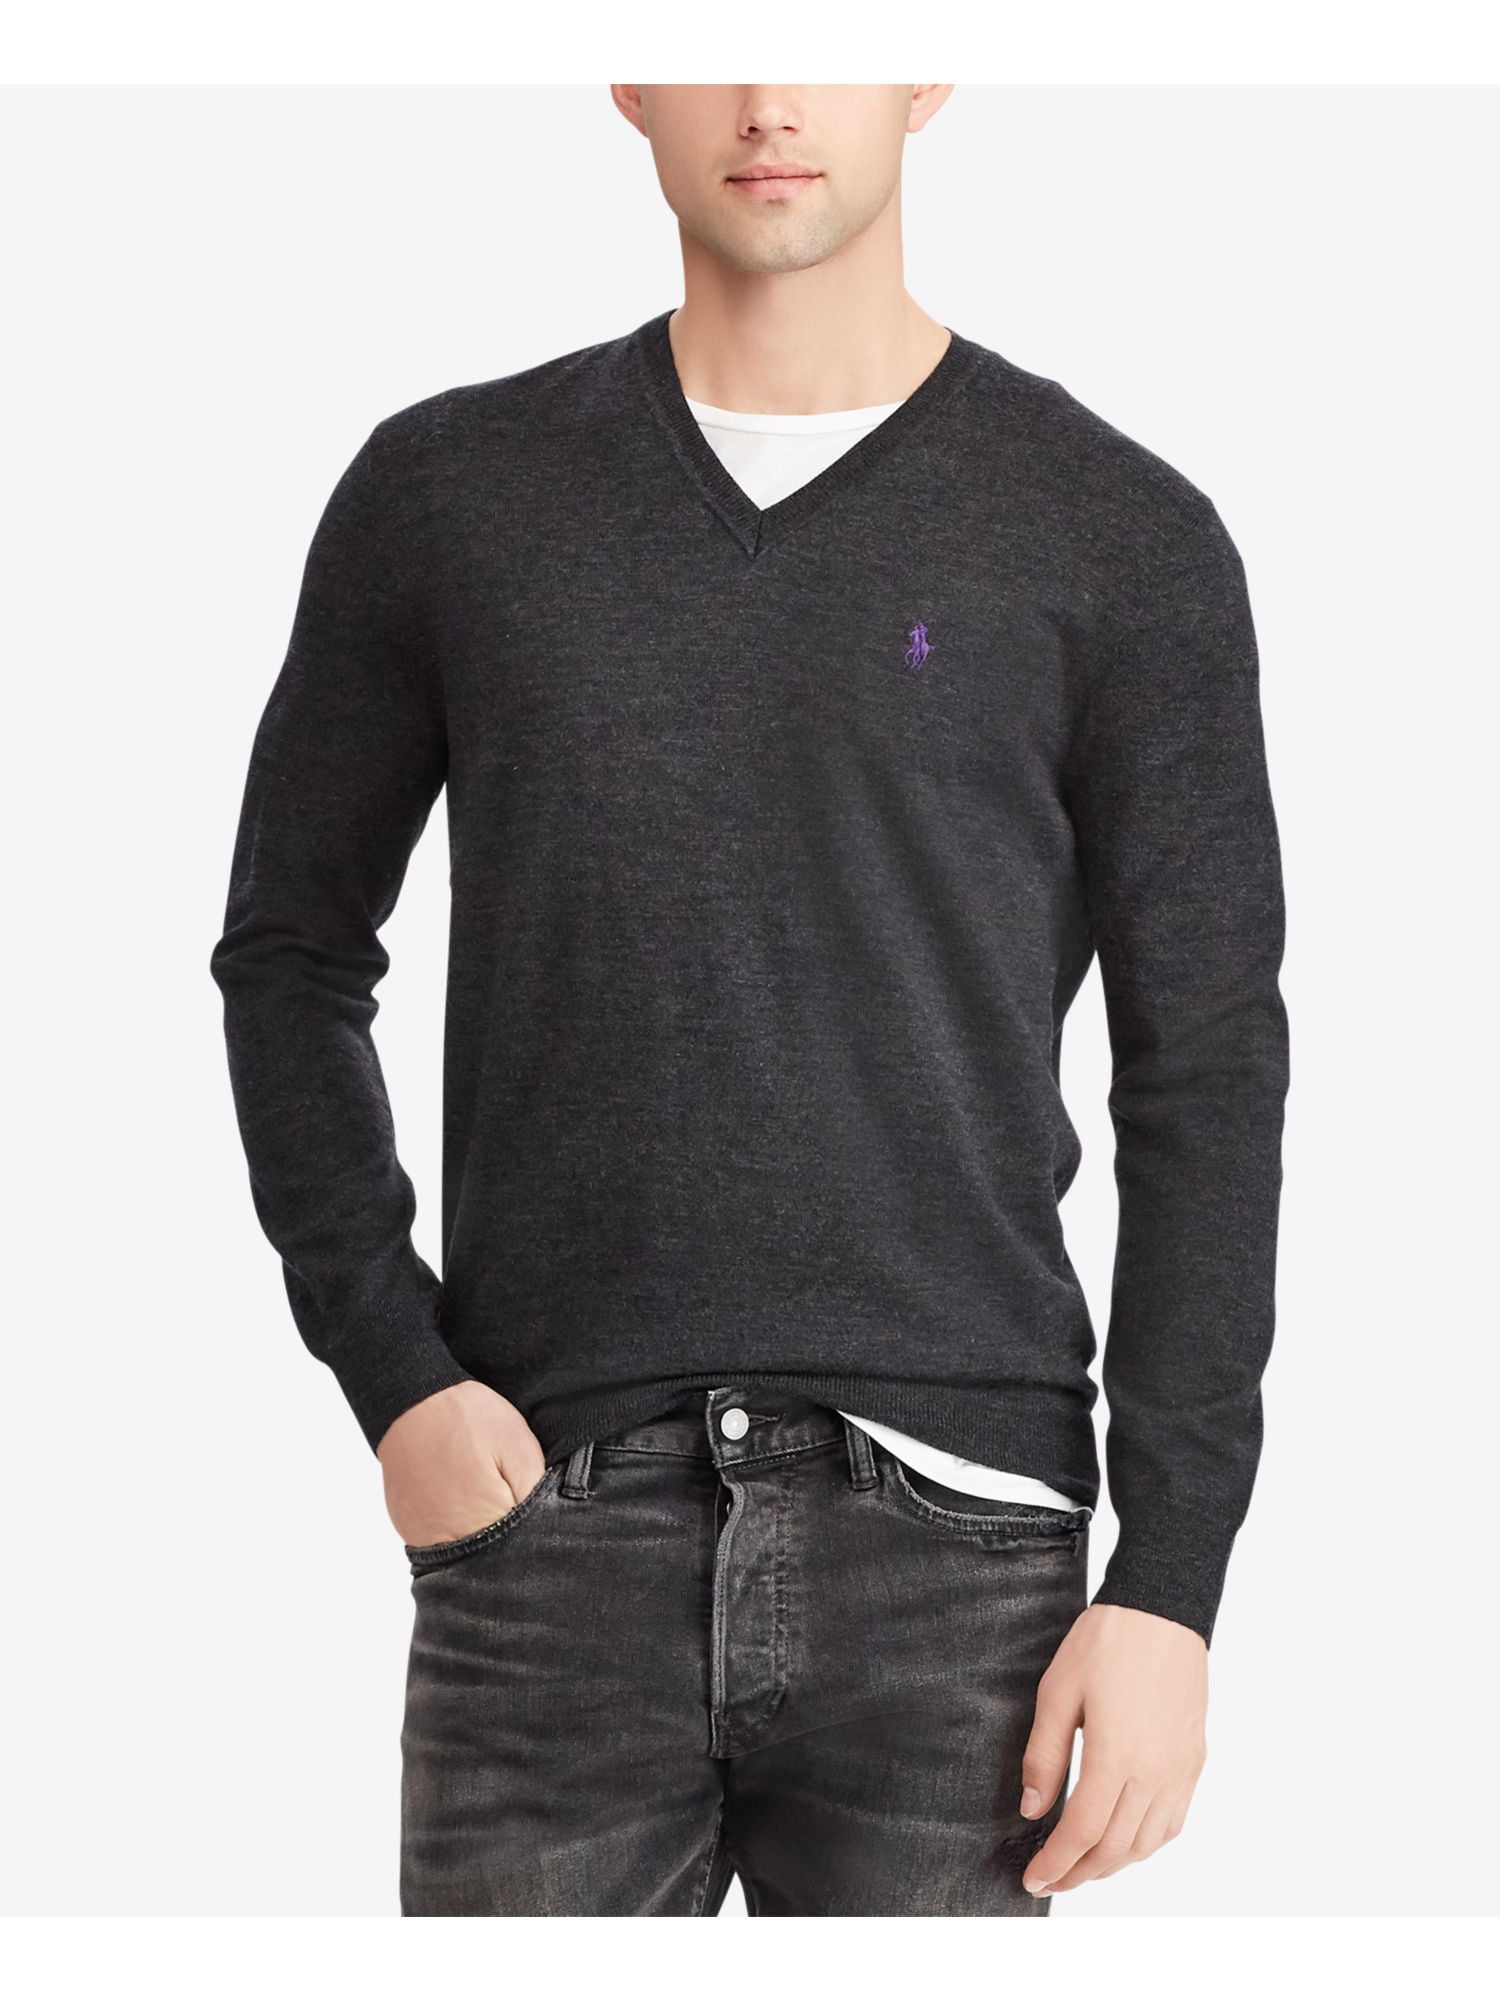 midnat Il Med andre ord POLO RALPH LAUREN Mens Gray Heather V Neck Classic Fit Merino Blend Pullover  Sweater XXL - Walmart.com